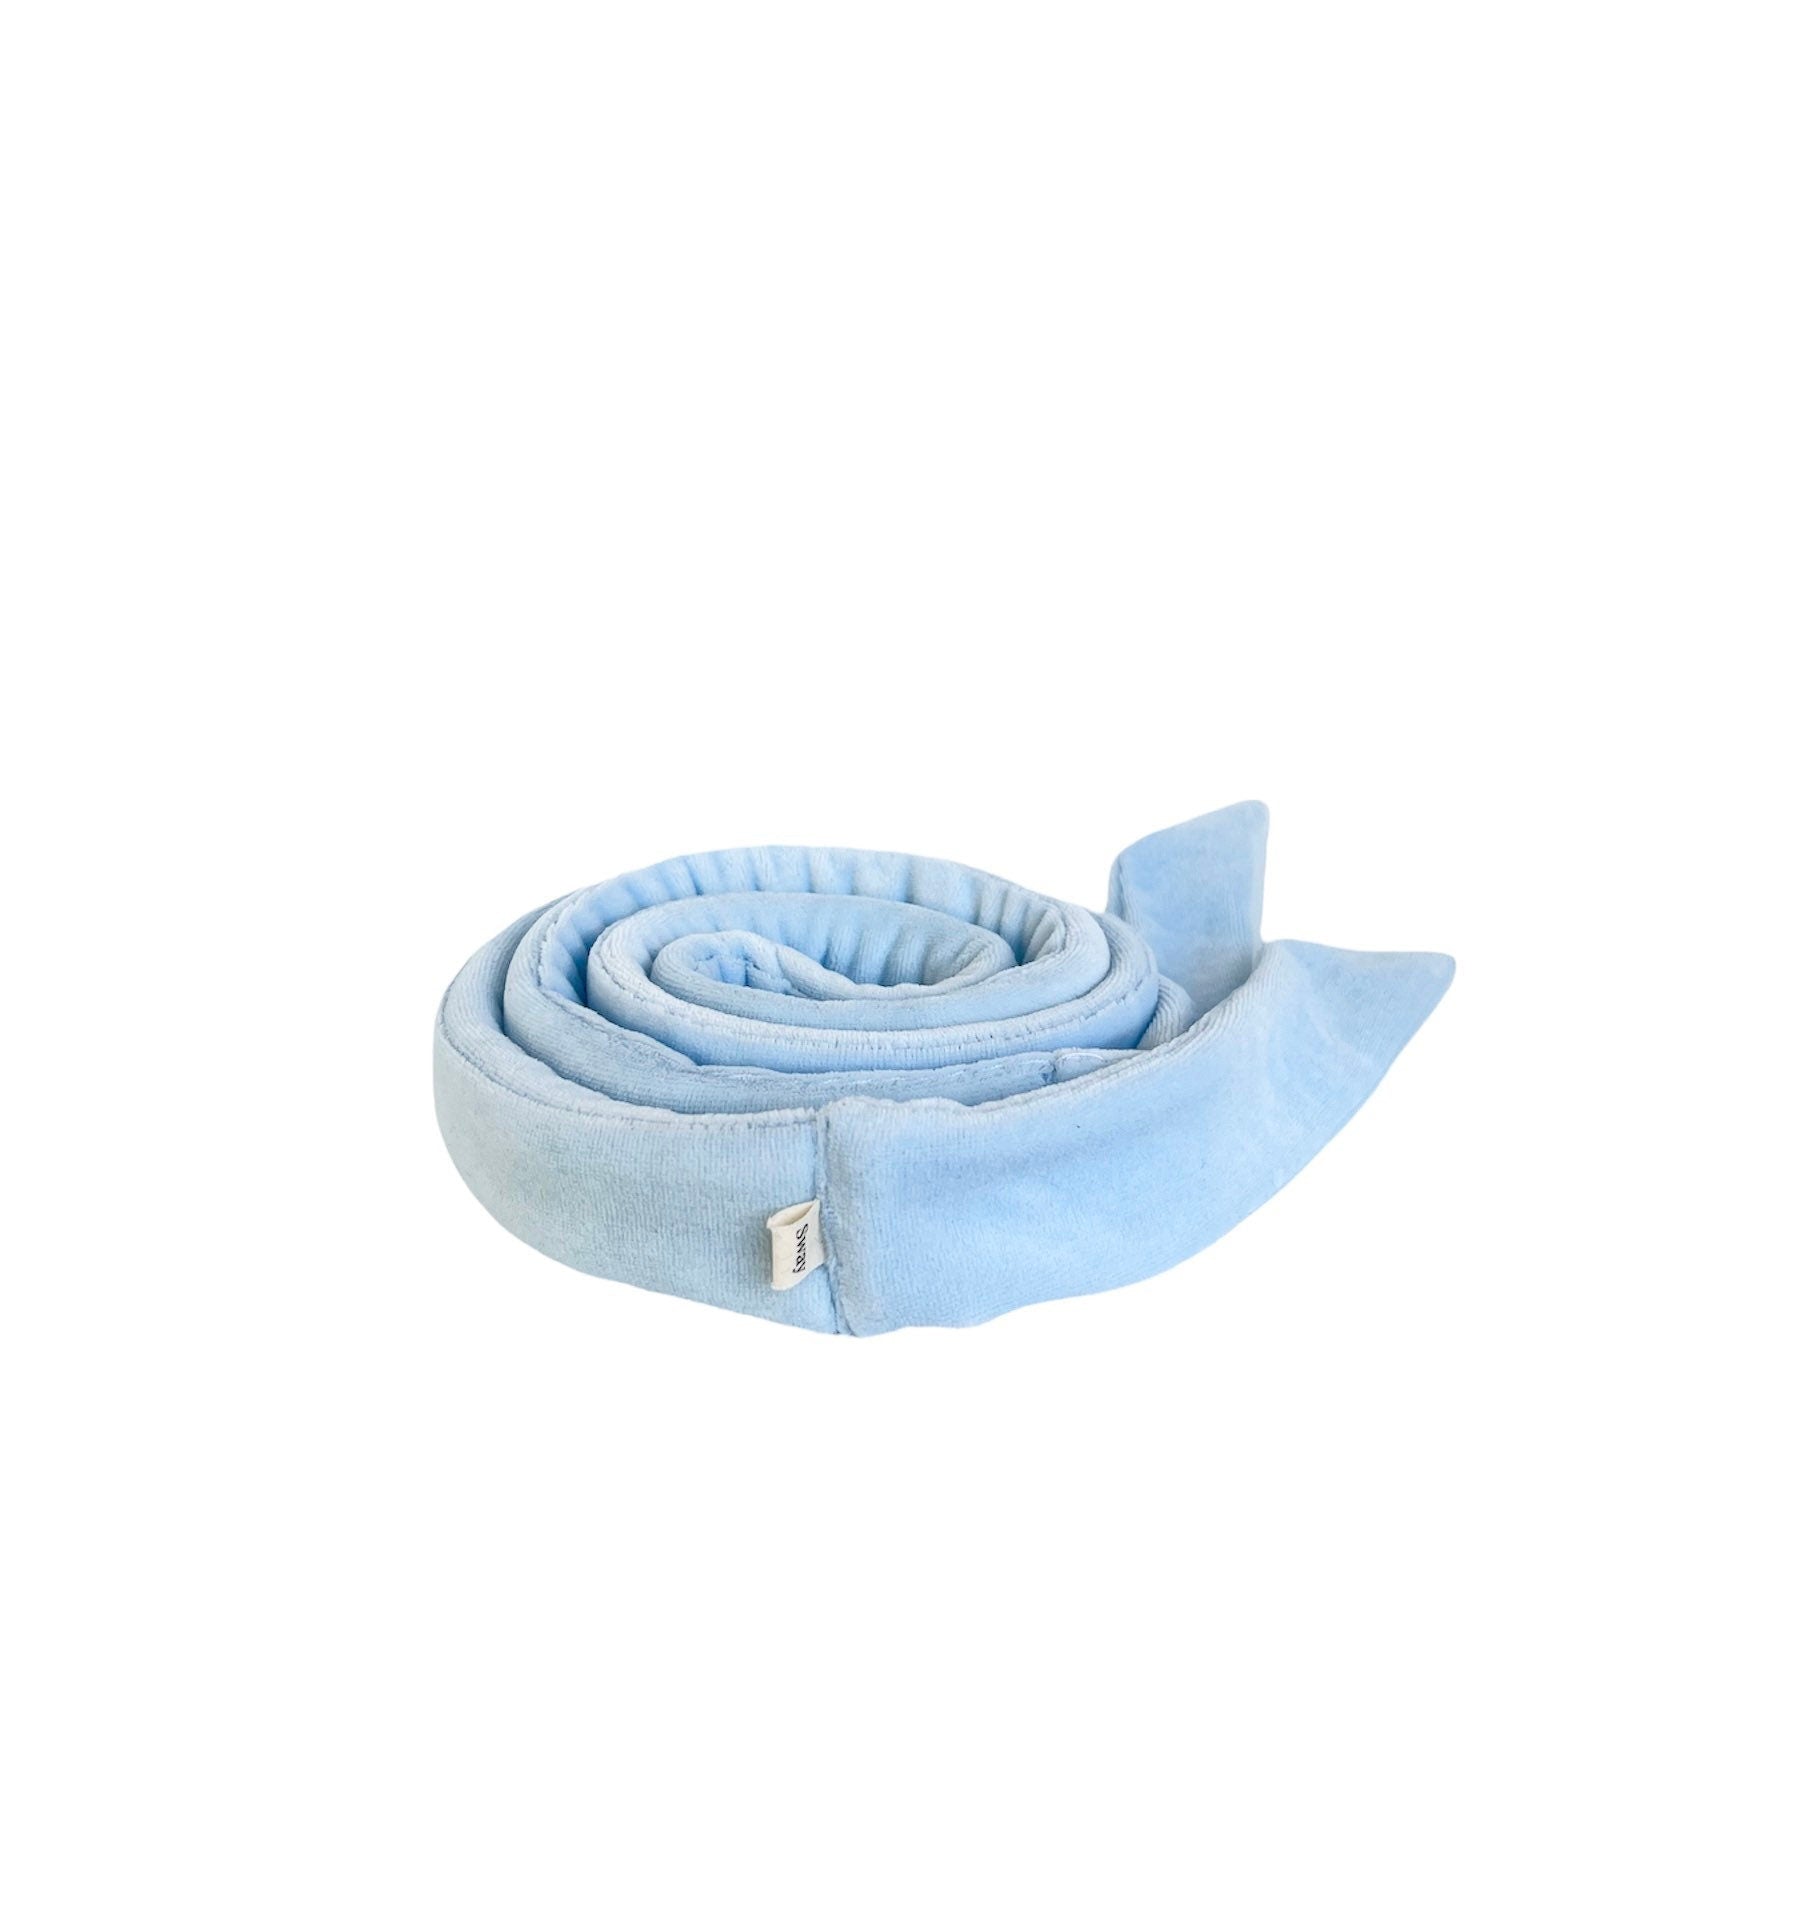 Set / The Sway / Scalp massager / Bamboo / Heatless curling ribbon / Made in USA / Cotton velour / Sky Blue / Curls / Beachy waves